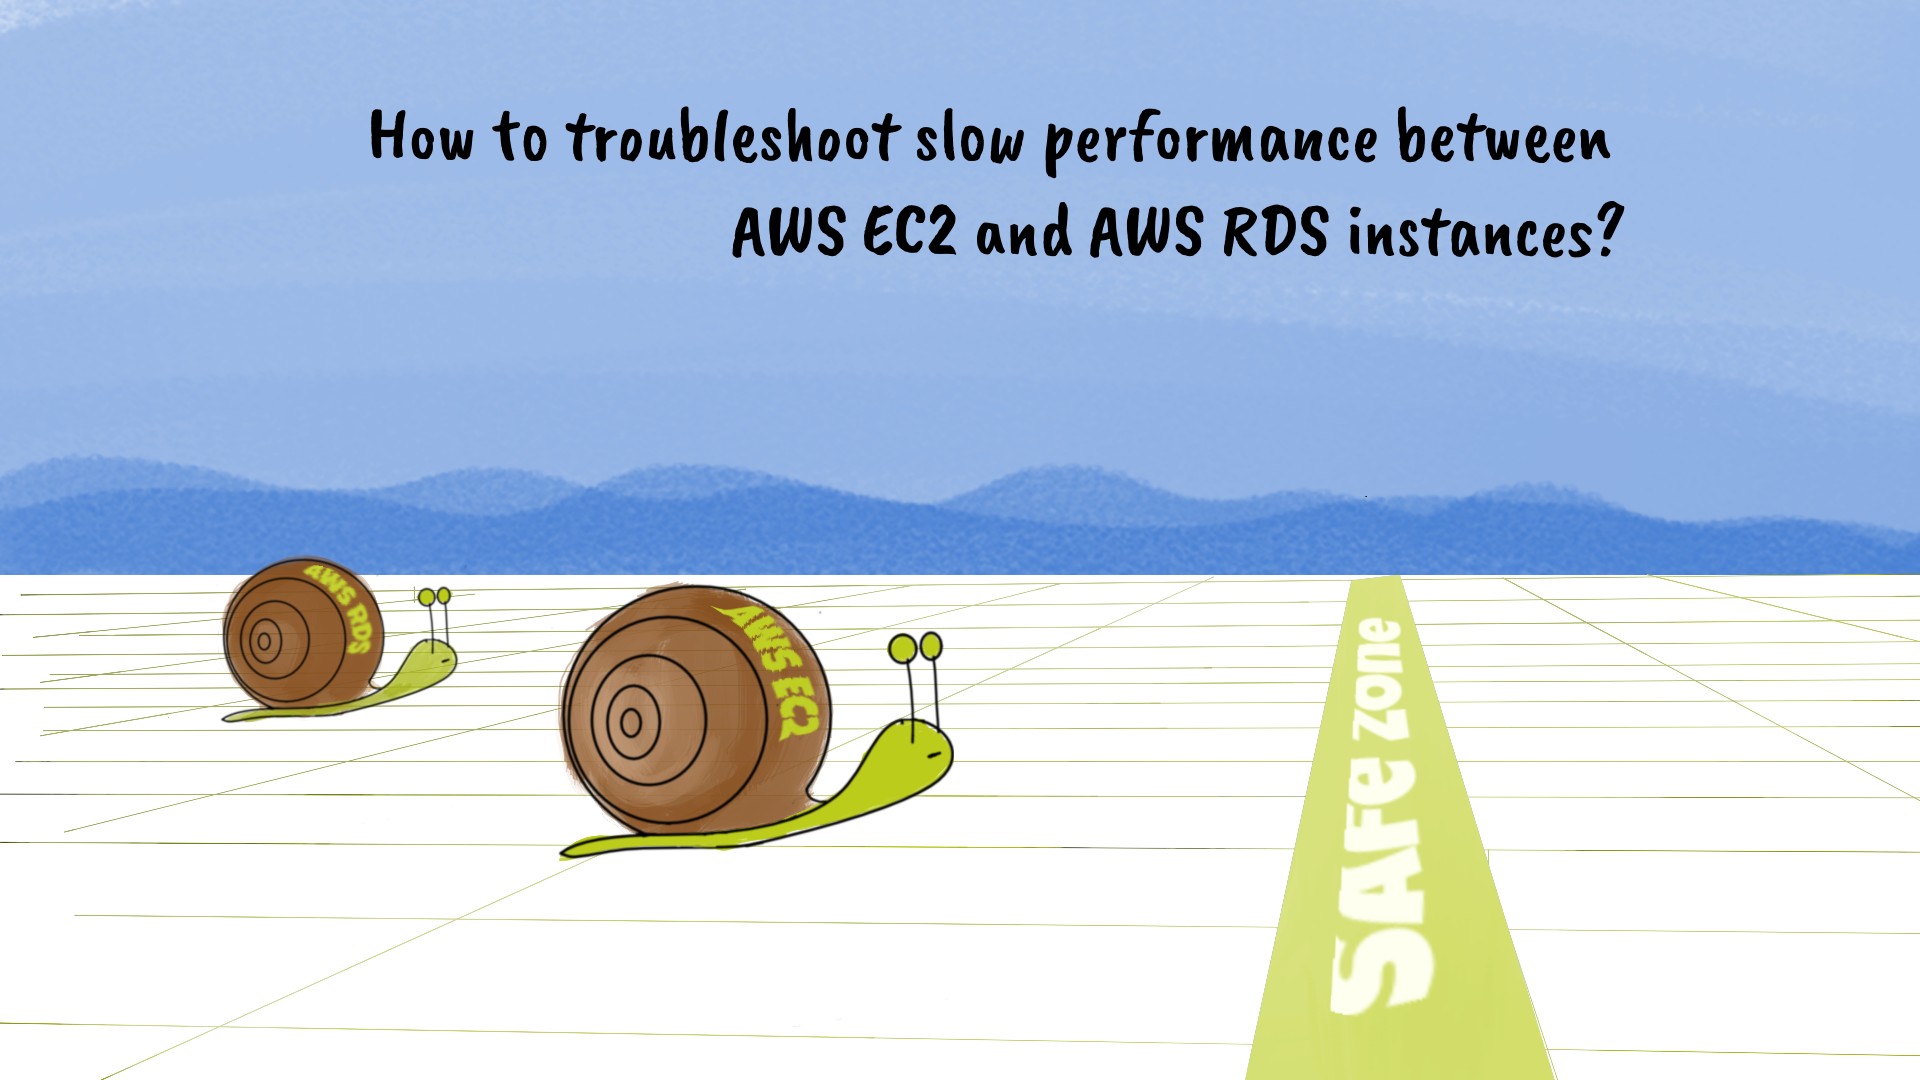 Two snails labelled with AWS EC2 and AWS RDS are participating in the race. There is a line marked as a safe zone, and no snail crossed that line.